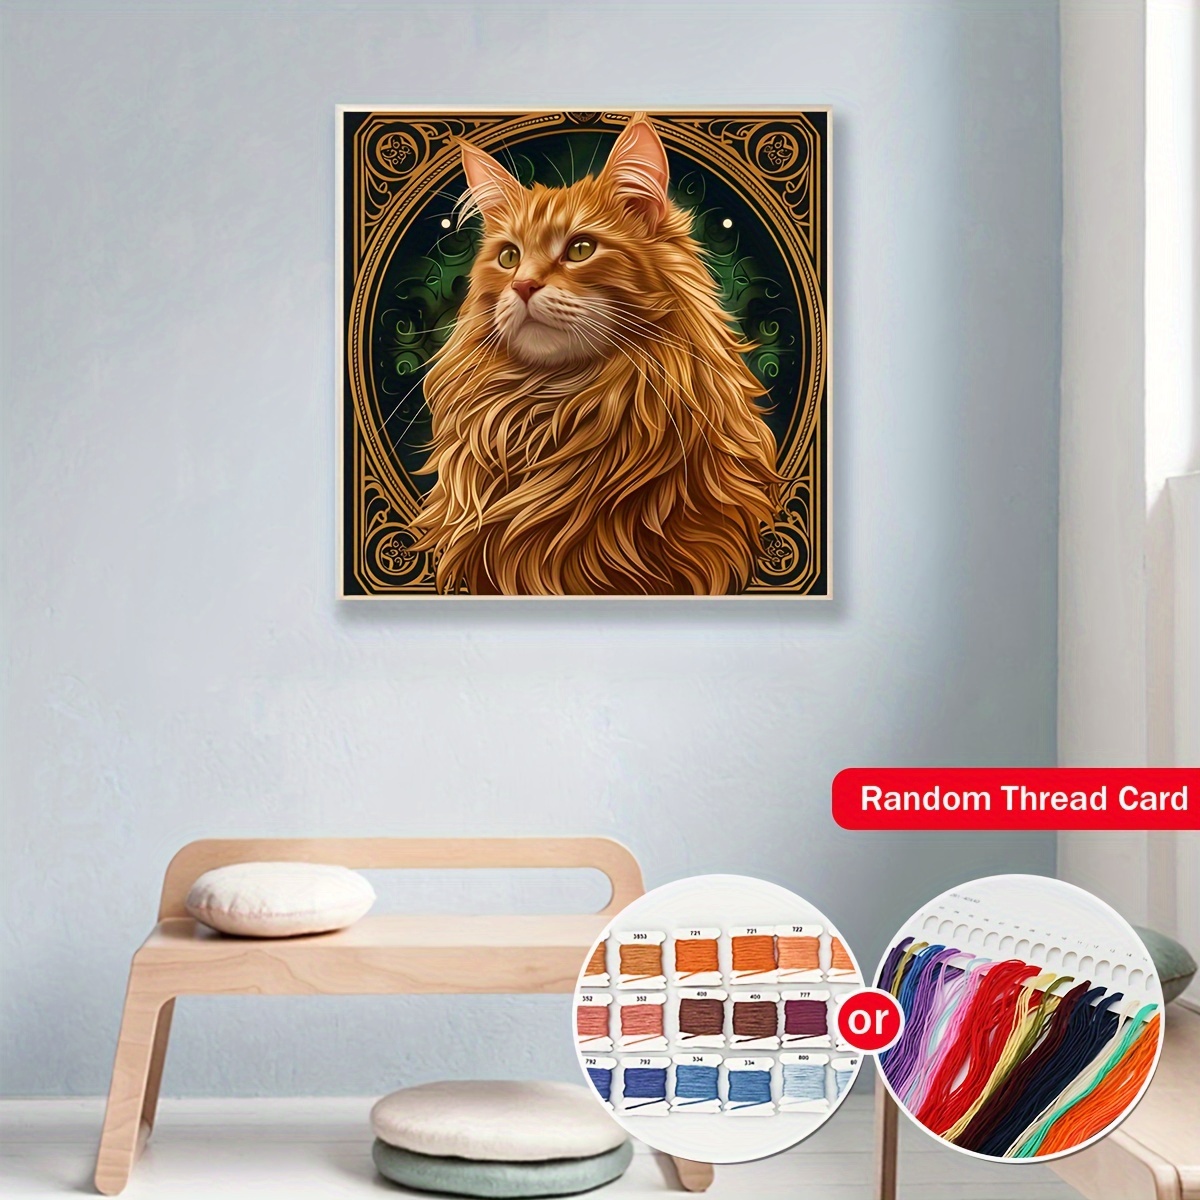 

Diy Cross Stitch Kit - Cute Kitten Design, 15.7x15.7" | Complete Craft Set For Home Decor | Perfect For Living Room, Bedroom & Entryway | Mixed Colors | All-season Art Gift